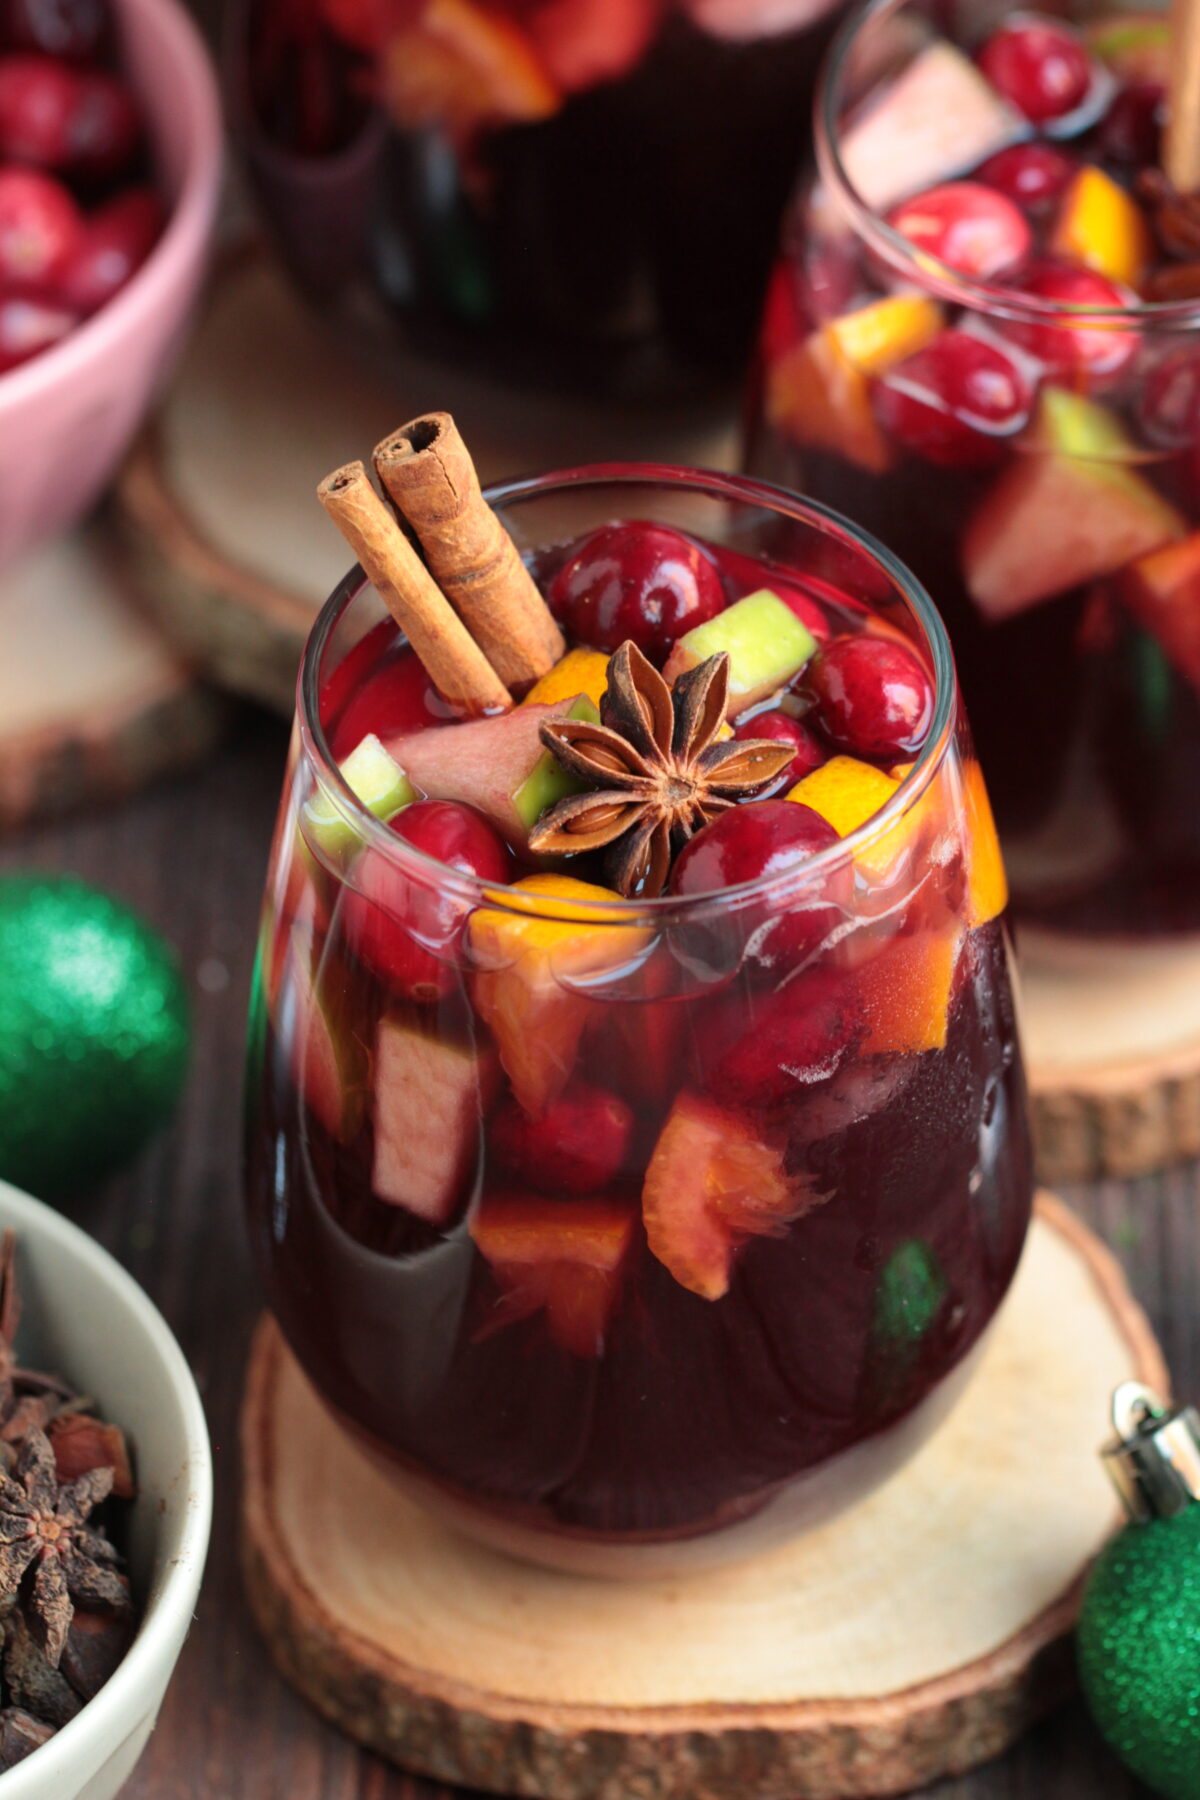 This holiday season serve up Holiday Spiced Red Wine Sangria for an easy and delicious cocktail perfect for any party or get-together!